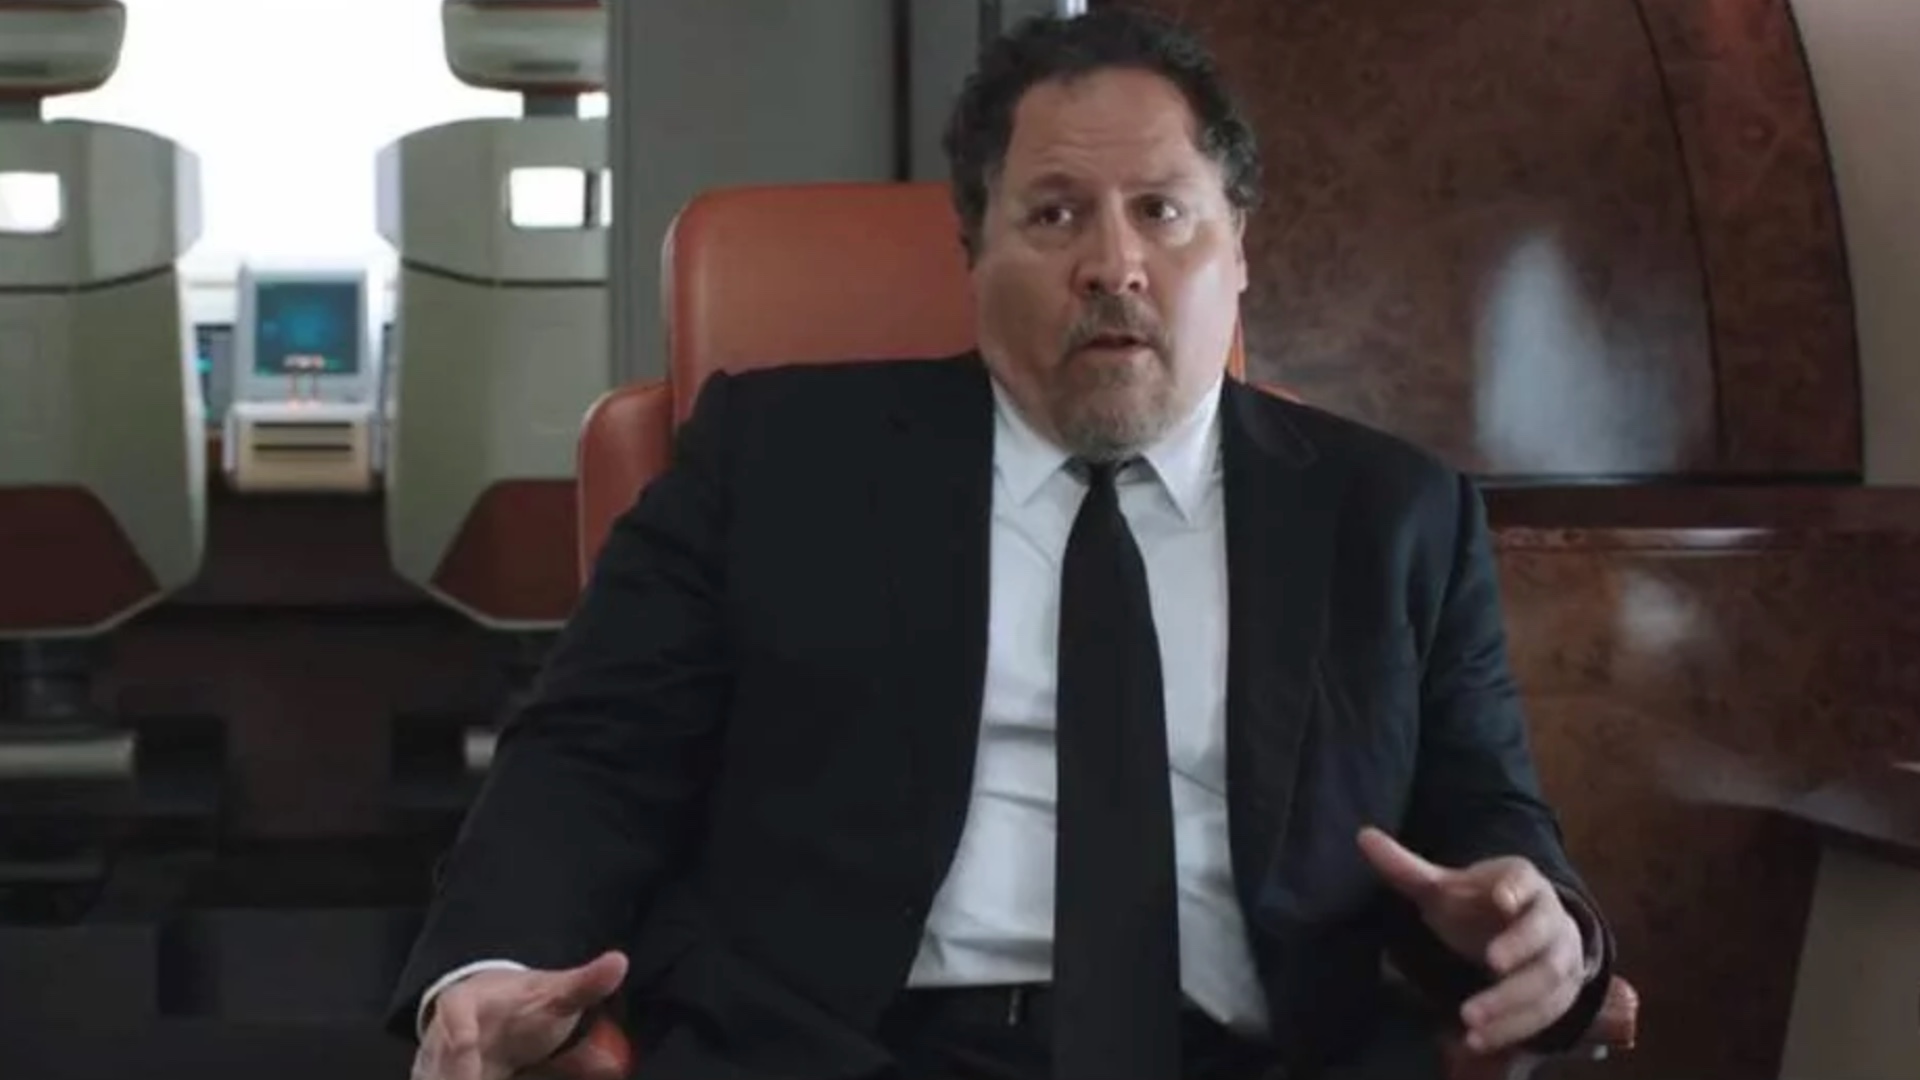 jon favreau is open to directing another movie for marvel what do you think it should be social